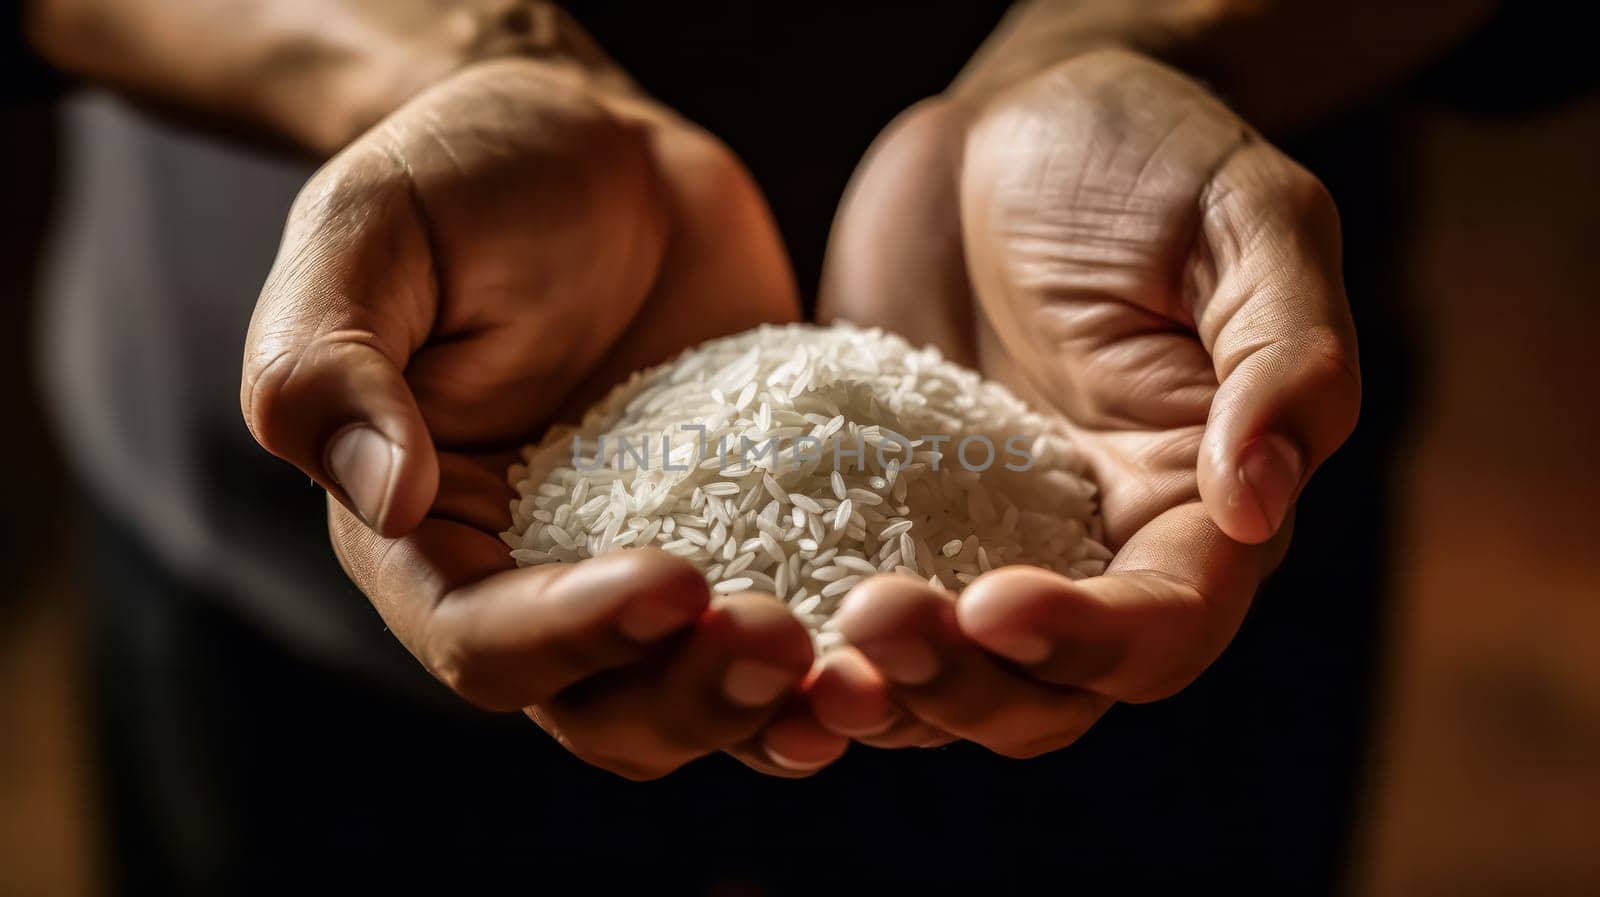 Harvest in Hands, Strong hands cradle freshly peeled rice, symbolizing the essence of farm to table goodness and wholesome nutrition.